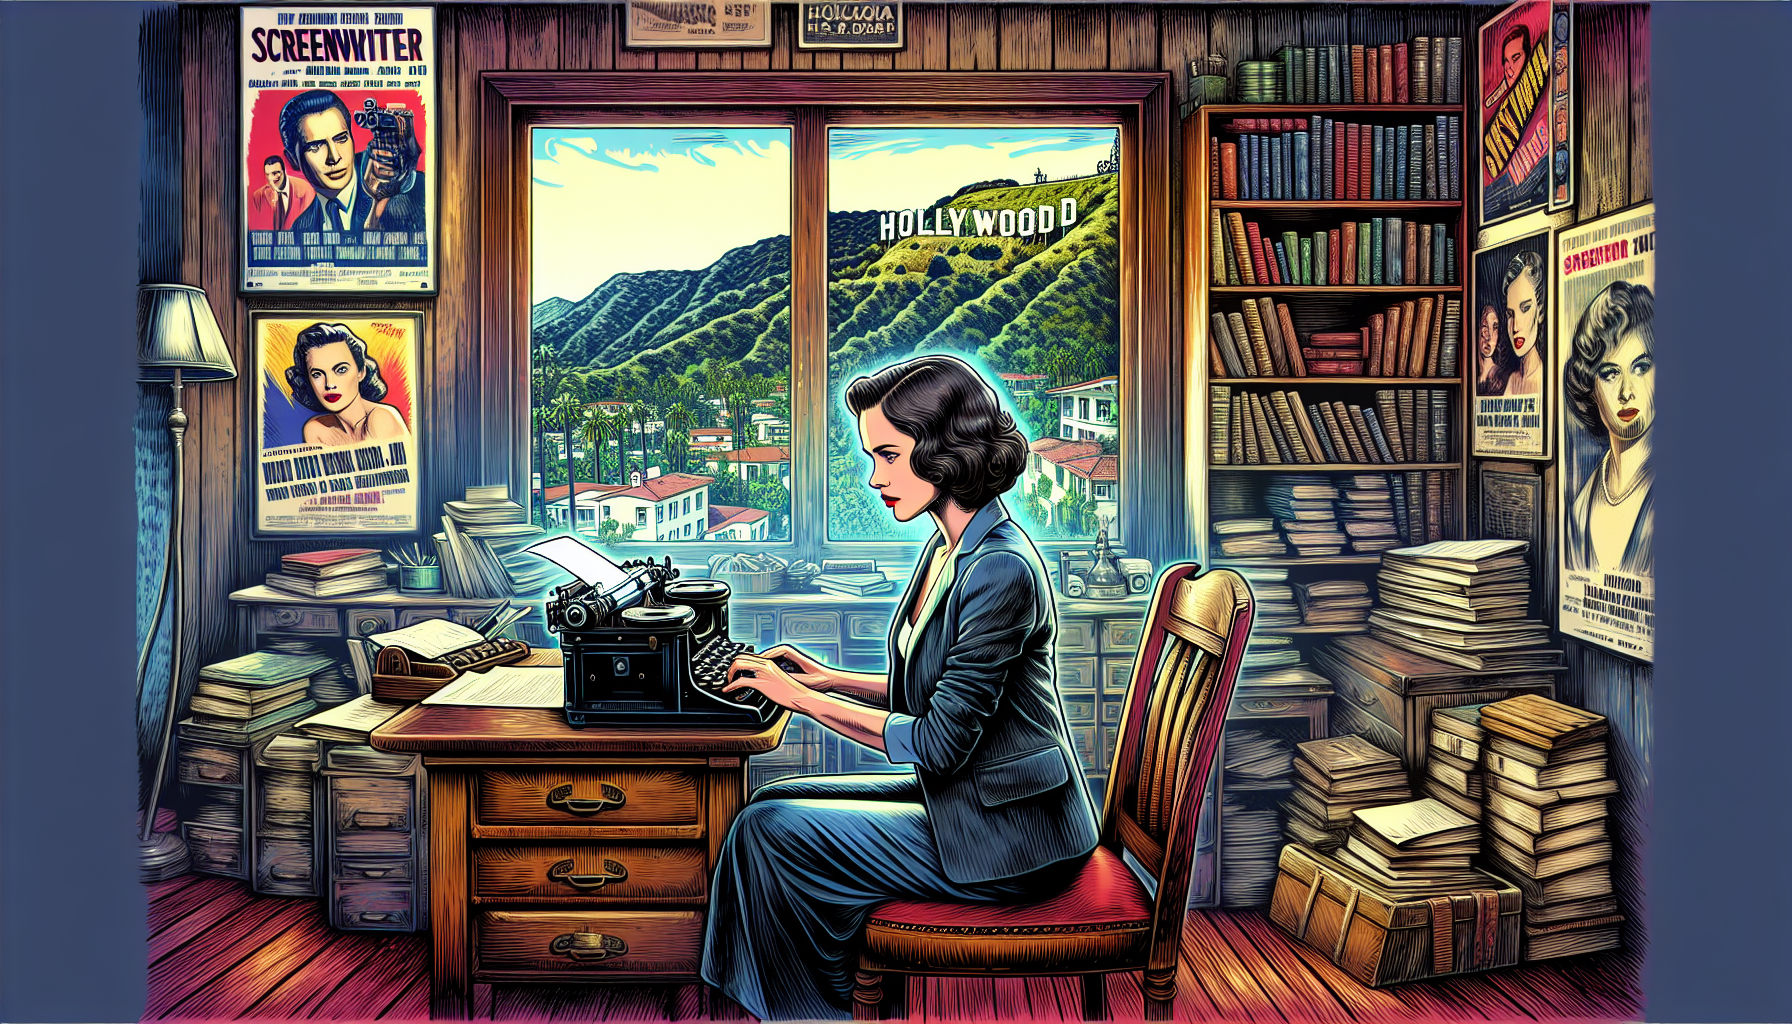 An artistic representation of a female screenwriter brainstorming in a cozy, vintage-styled study filled with film posters and books, a typewriter in front of her and a window showing a view of the Ho